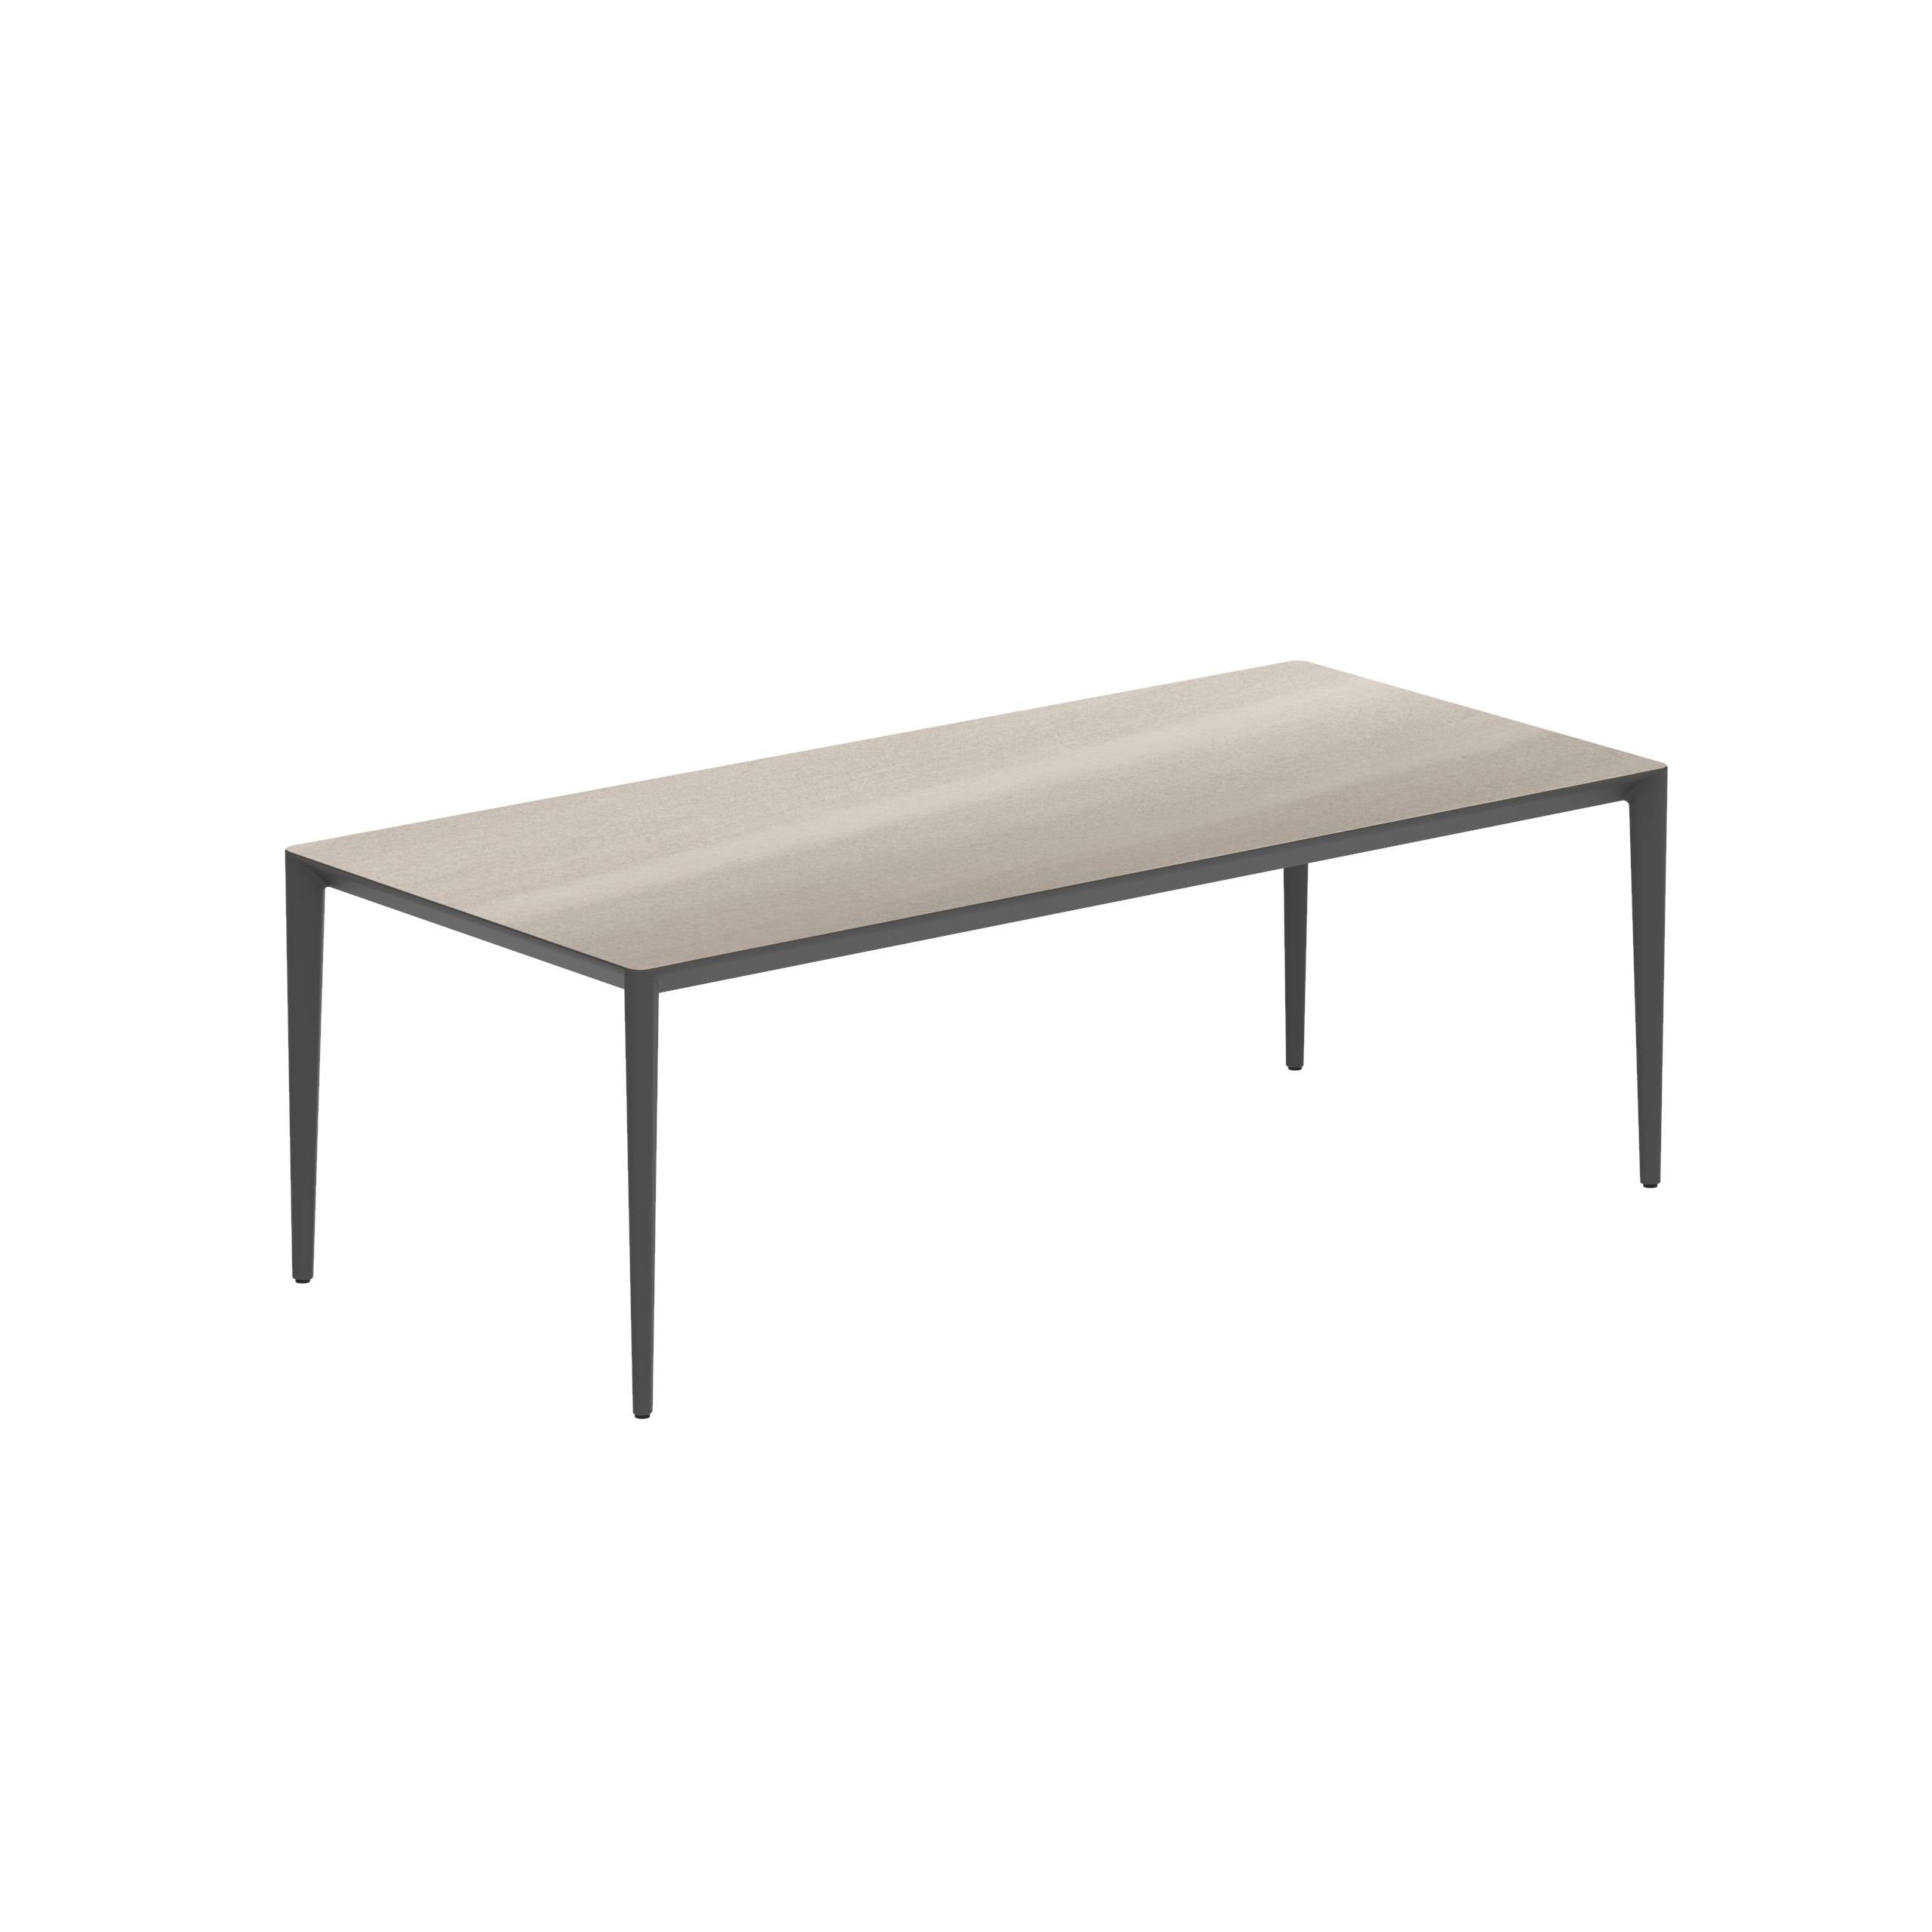 U-Nite Table 220x100cm Anthracite With Ceramic Tabletop In Taupe Grey